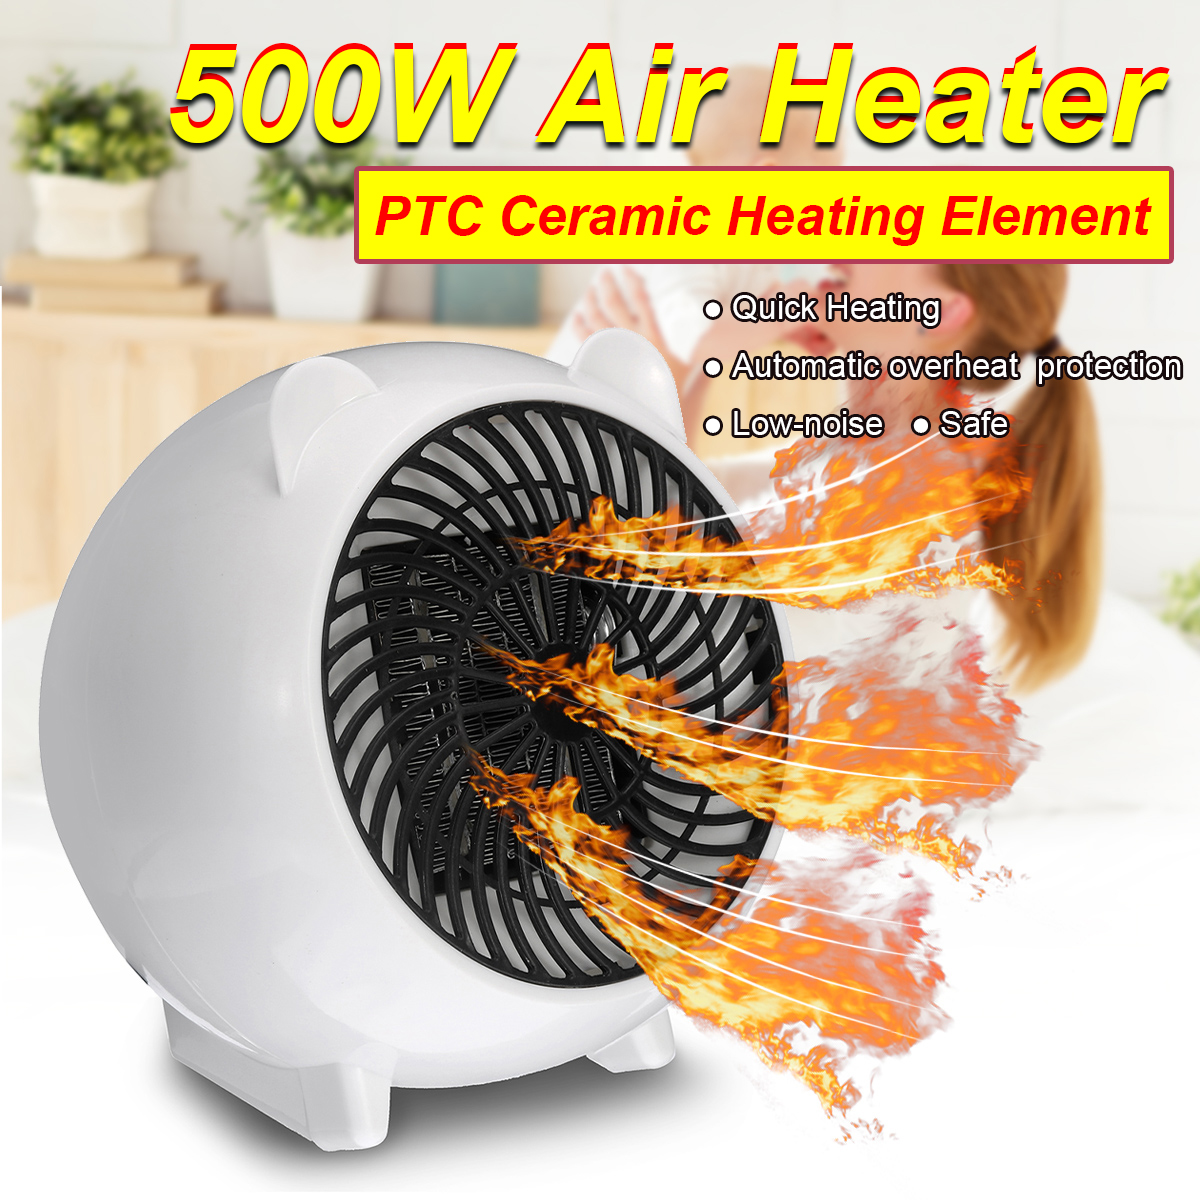 500W-Mini-Size-Personal-Space-Heater-Electric-Heater-for-Home-Office-Small-Heater-PTC-Ceramic-Air-He-1564564-1